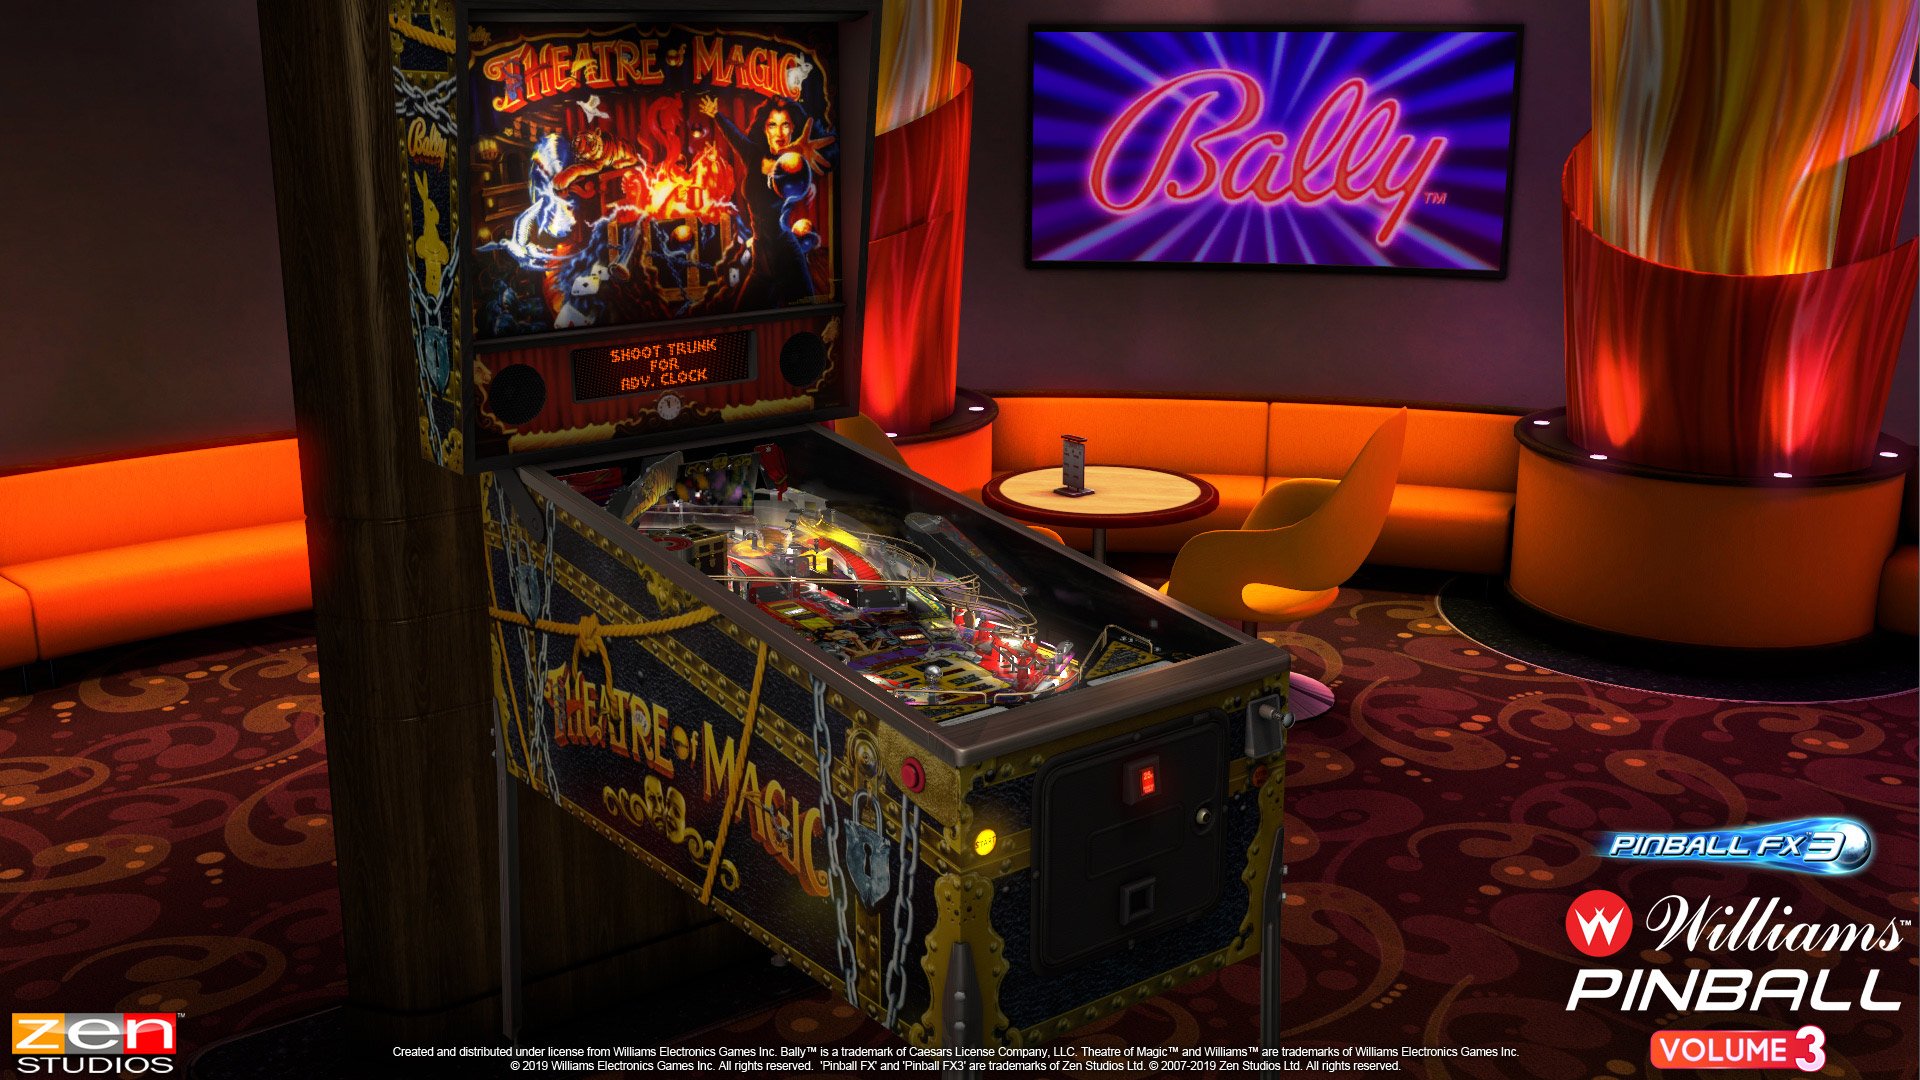 Now The Time Is Here To Tell You About The Newest Additions Fx3 Williams Pinball Volume 3 Wallpaper & Background Download